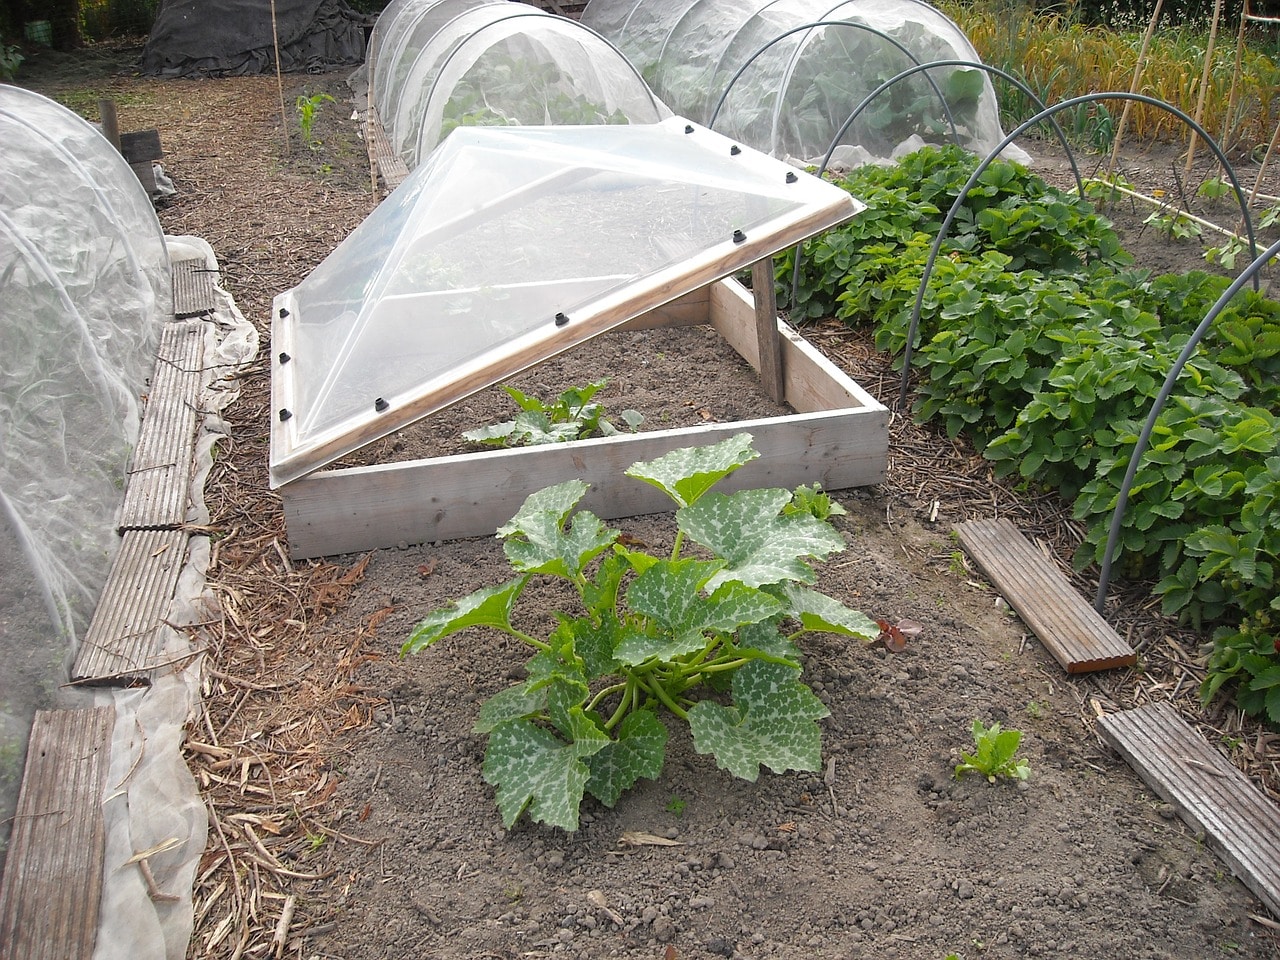 How to Make a Small Greenhouse for Seedlings